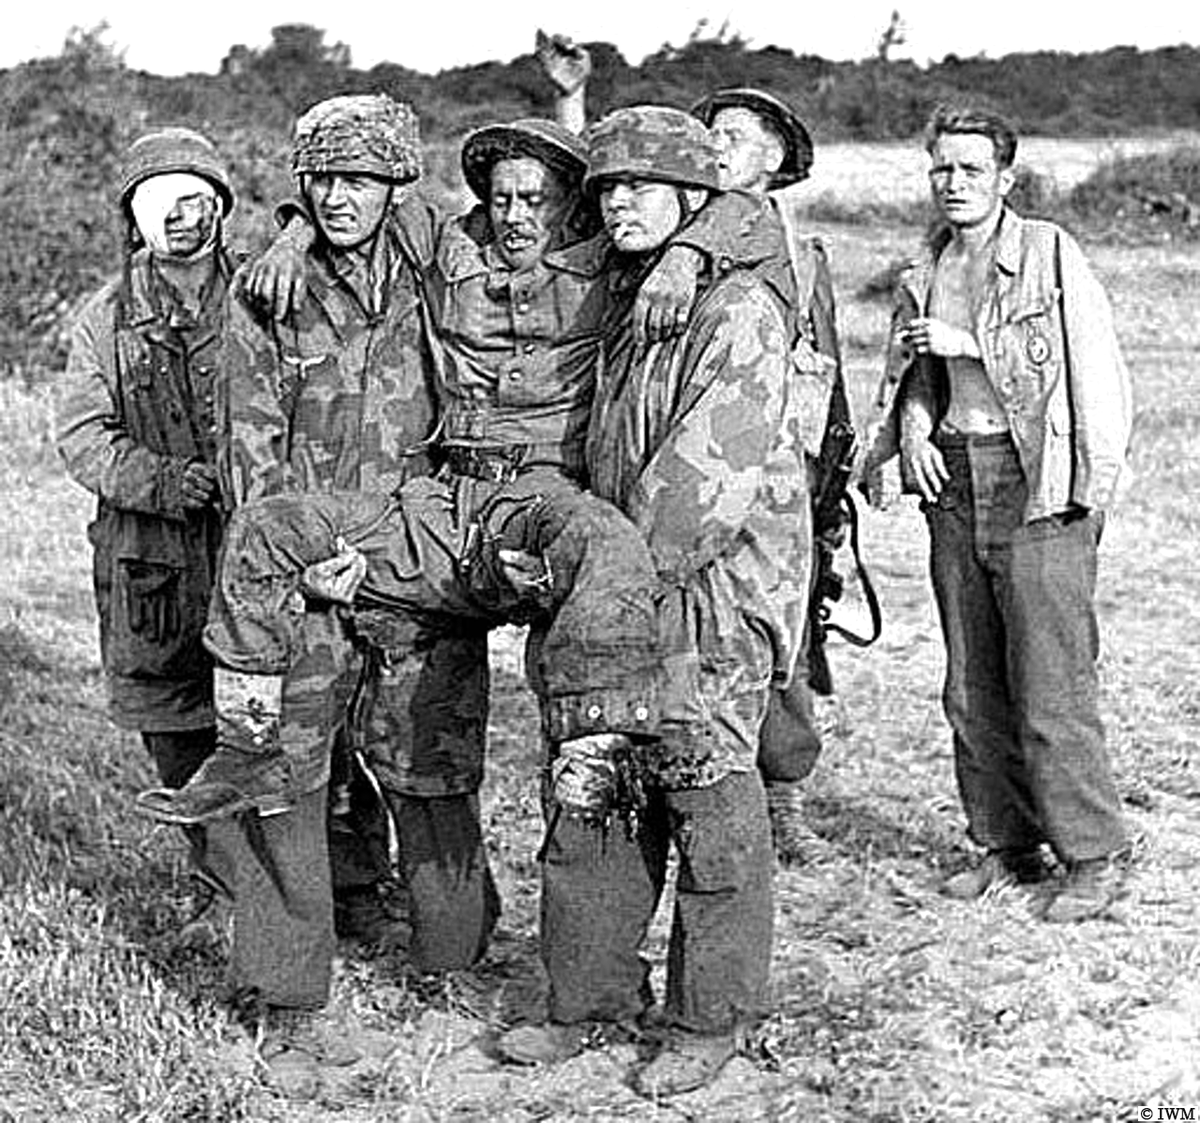 #OTD in 1944, Anzio area, Italy. Two captured German Fallschirmjäger carrying a wounded British soldier. #WW2 #HISTORY